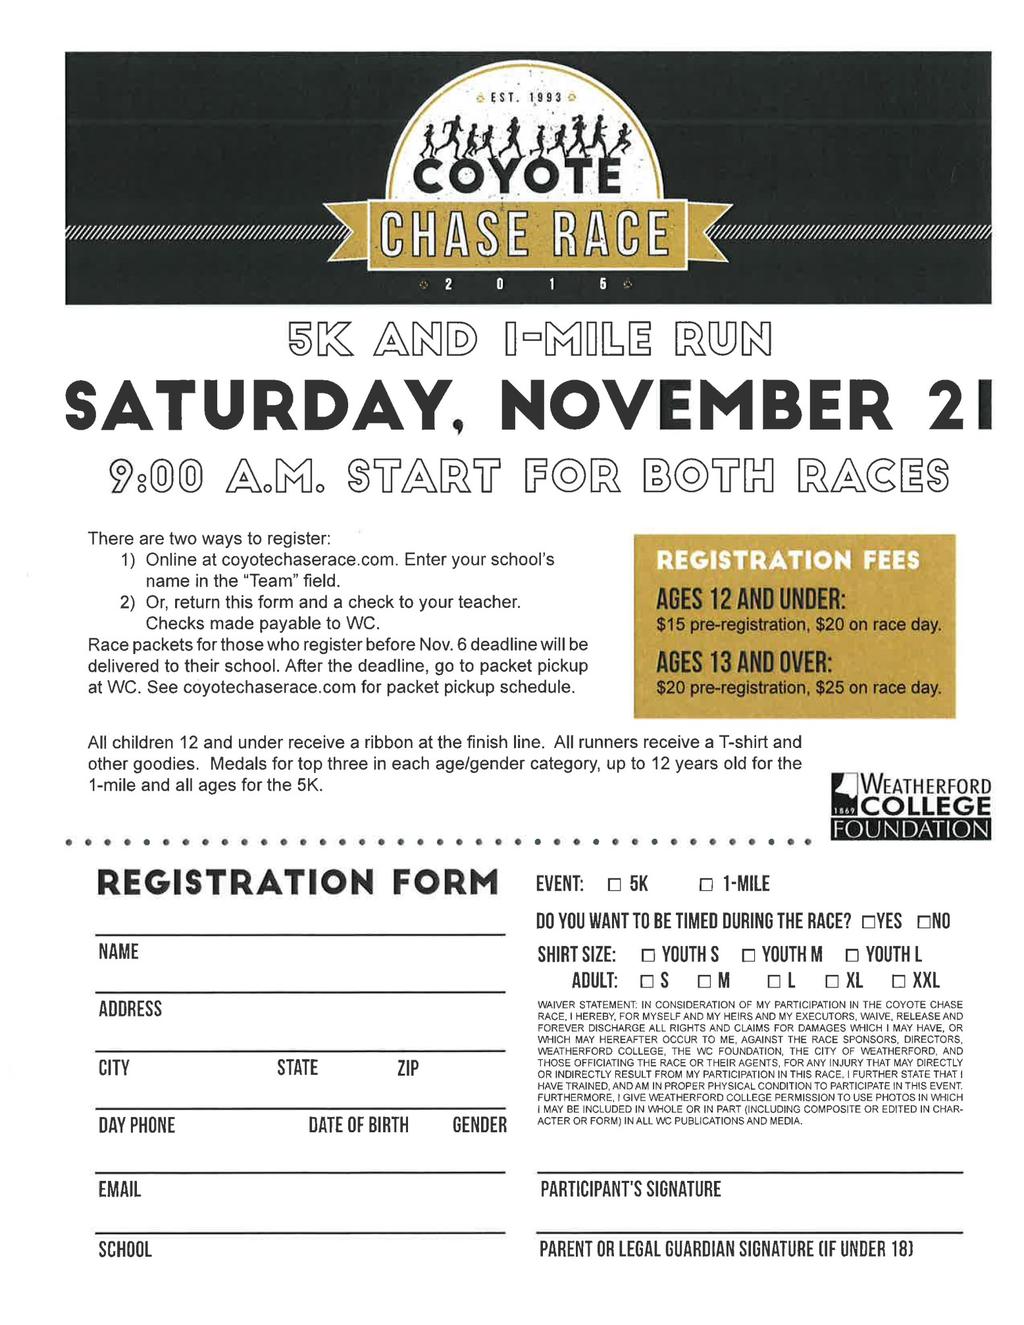 Register for the Coyote Chase Race (5K and 1-mile) Register by